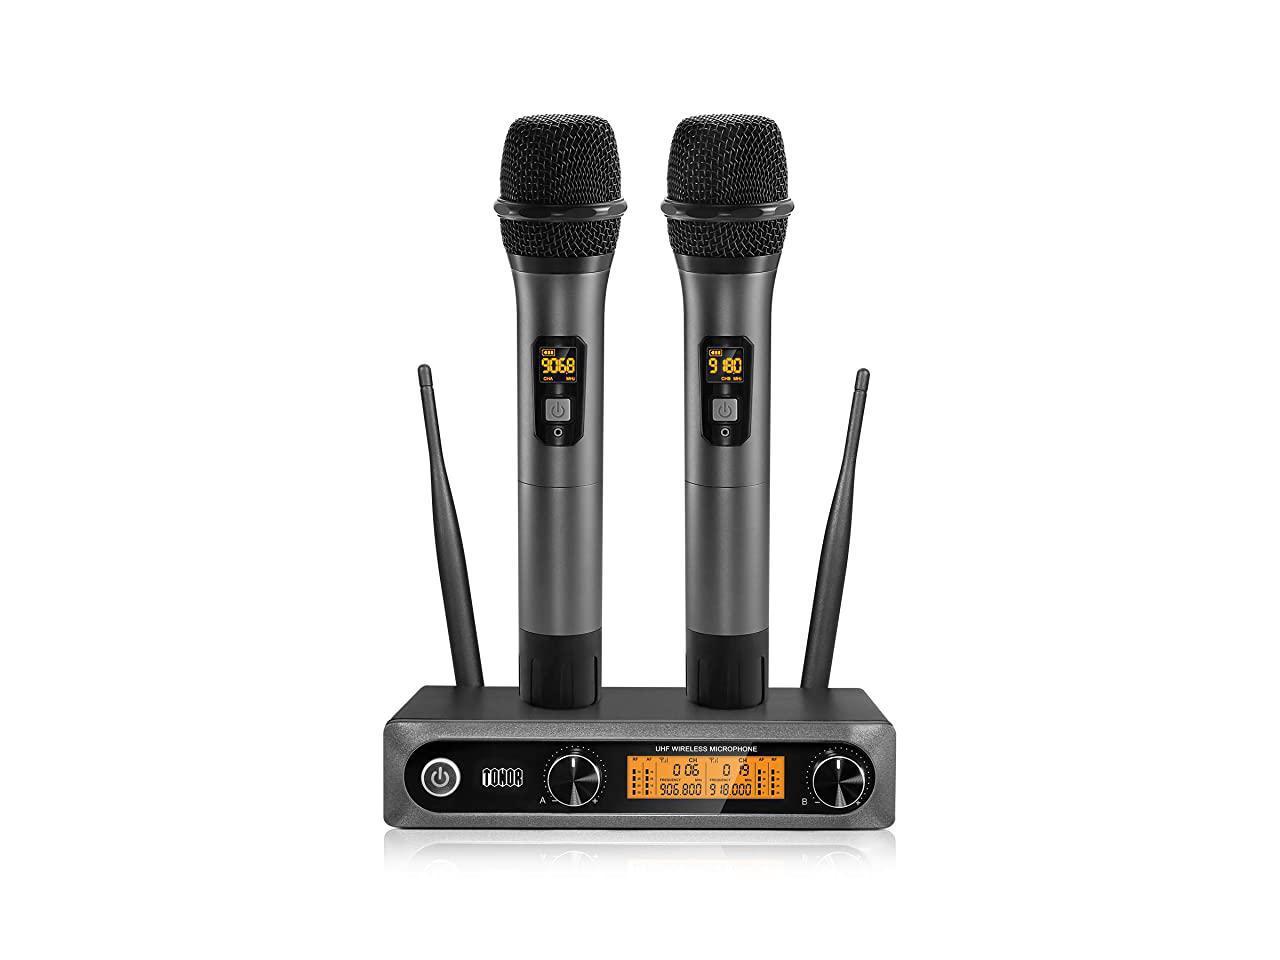 Wireless Microphone,Cordless 3.5mm Lavalier Clip-On Digital Mic with LED Display,1 x Receiver,1 x Transmitter,for Mobile Phones,Cameras,Recording,Video,Interview 